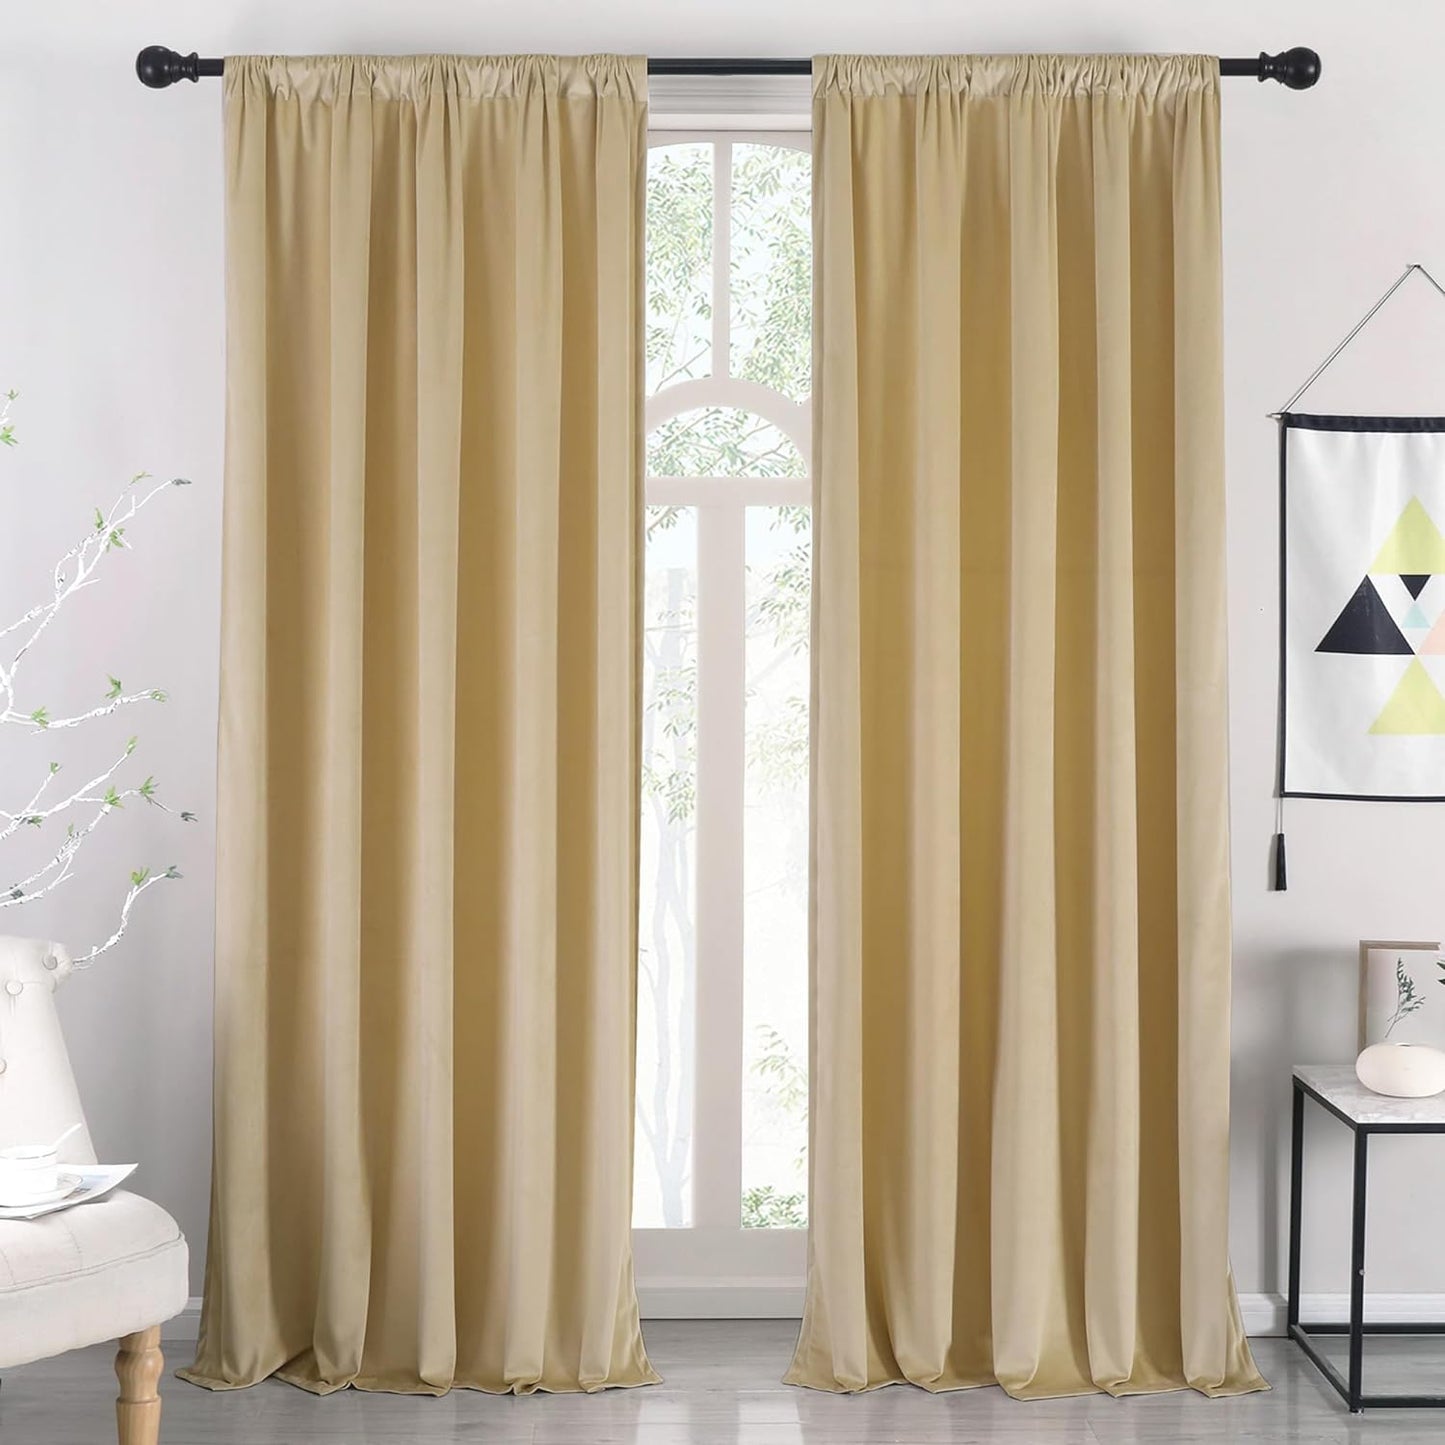 Nanbowang Green Velvet Curtains 63 Inches Long Dark Green Light Blocking Rod Pocket Window Curtain Panels Set of 2 Heat Insulated Curtains Thermal Curtain Panels for Bedroom  nanbowang Beige 42"X96" 